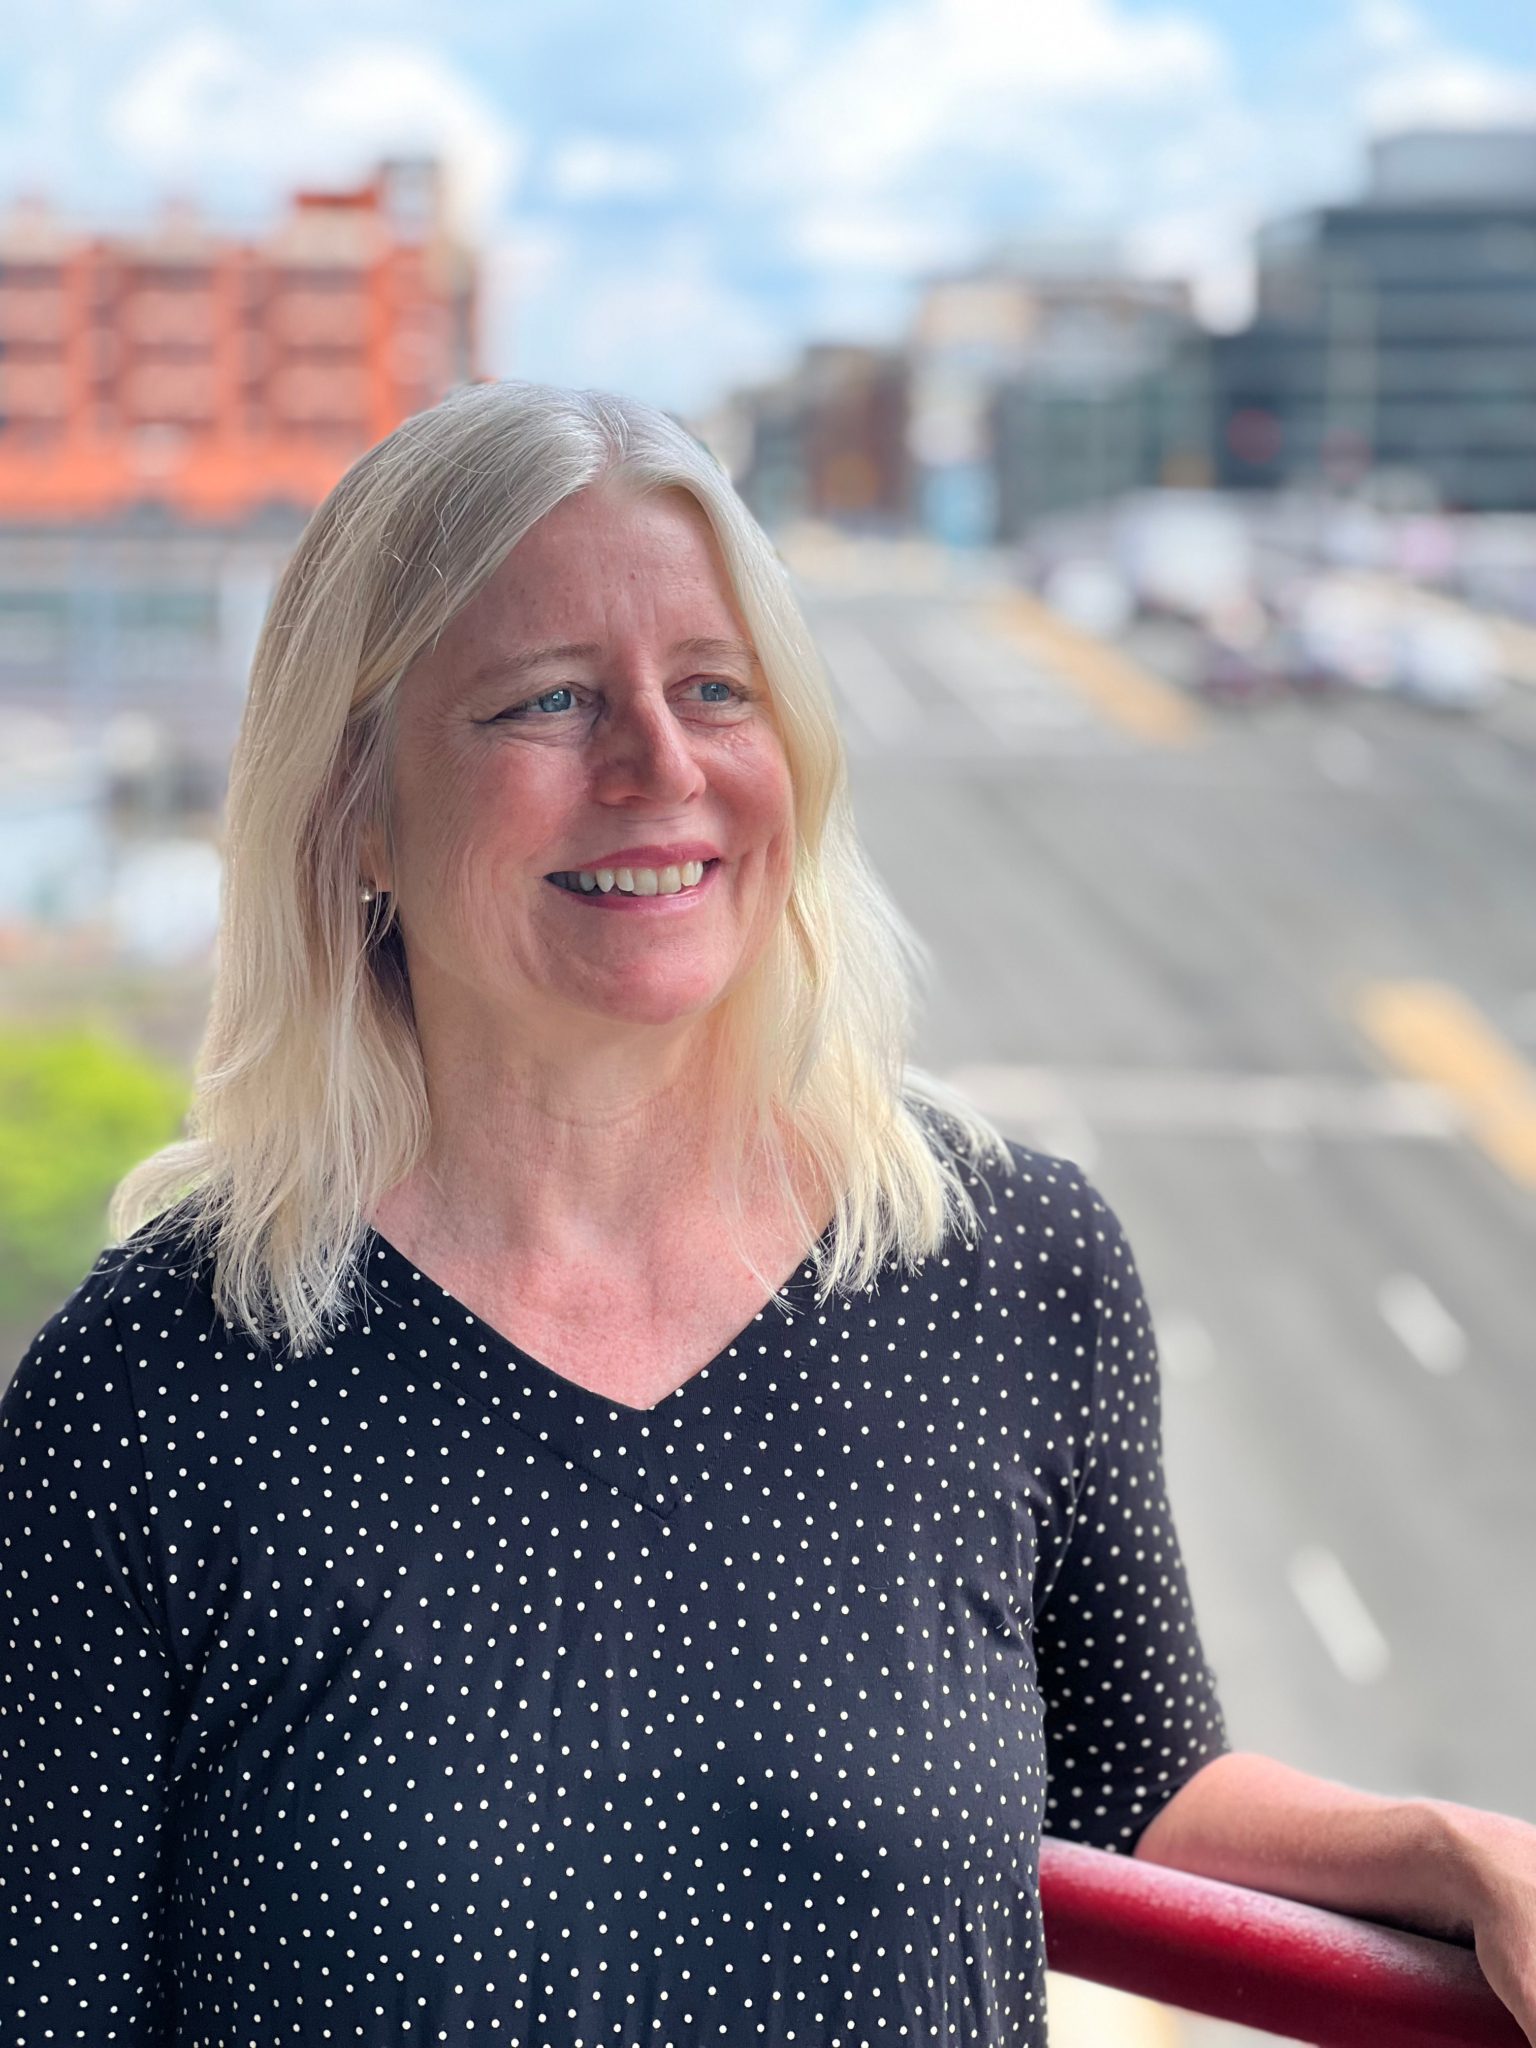 Portrait of Diane Smith Howard. Diane is a white woman with light blonde hair and blue eyes. She is black shirt with white dots on it. She's standing on a balcony, with a DC street in the background and high rise buildings. The background is blurred.